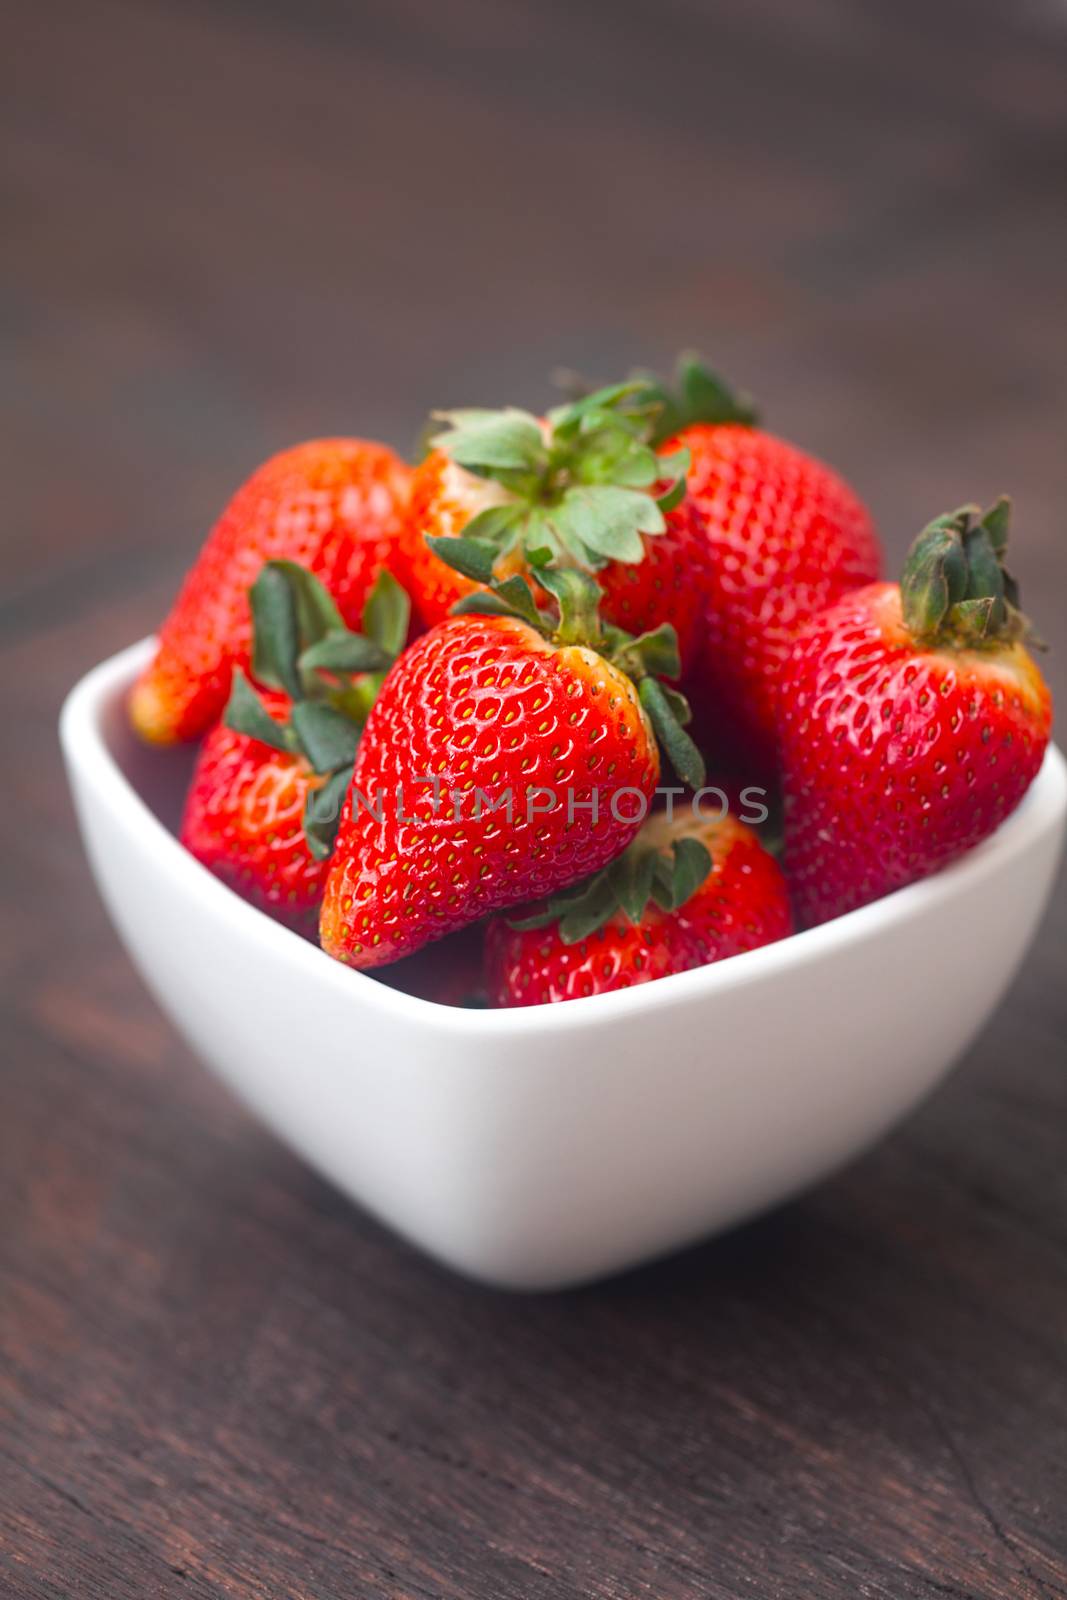 red juicy strawberry in a bowl on a wooden surface by jannyjus